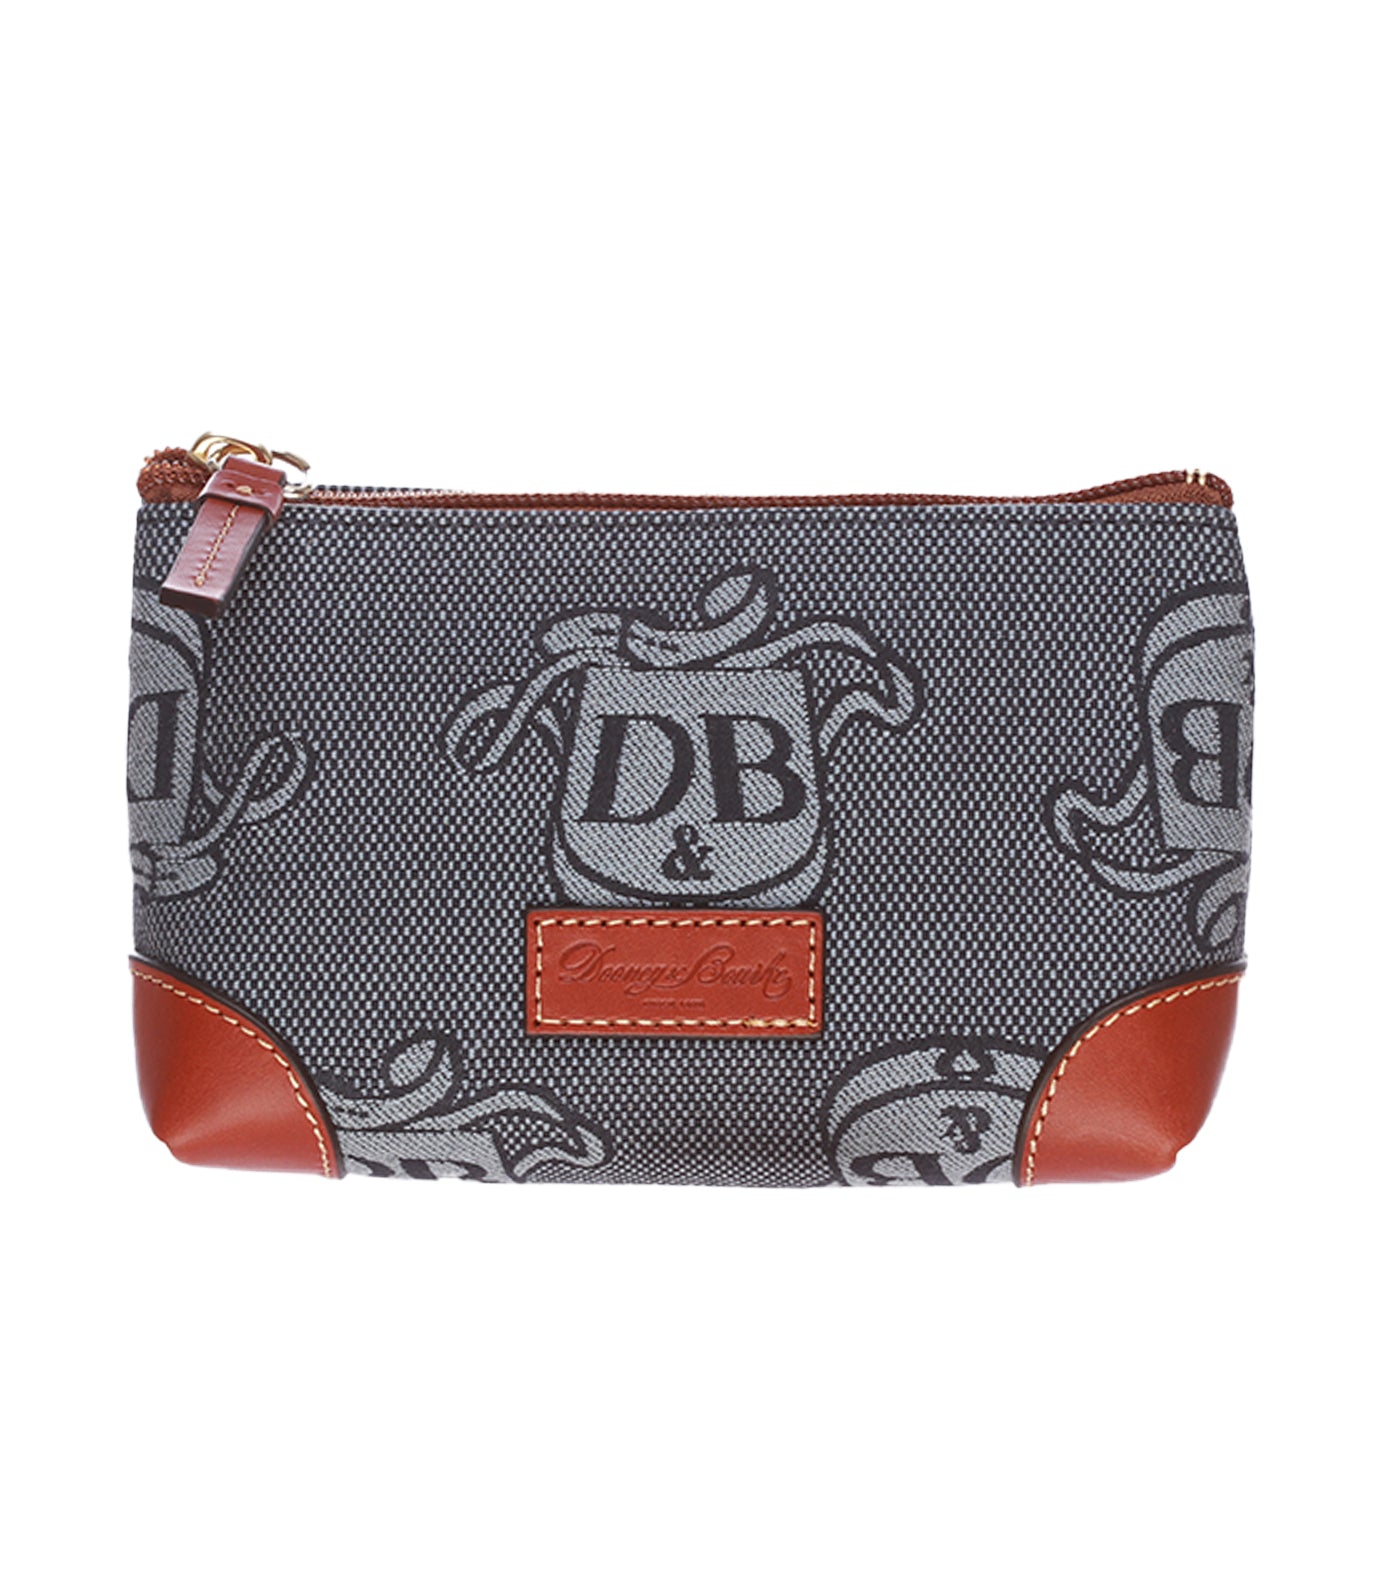 dooney & bourke free cosmetic pouch detailed blue